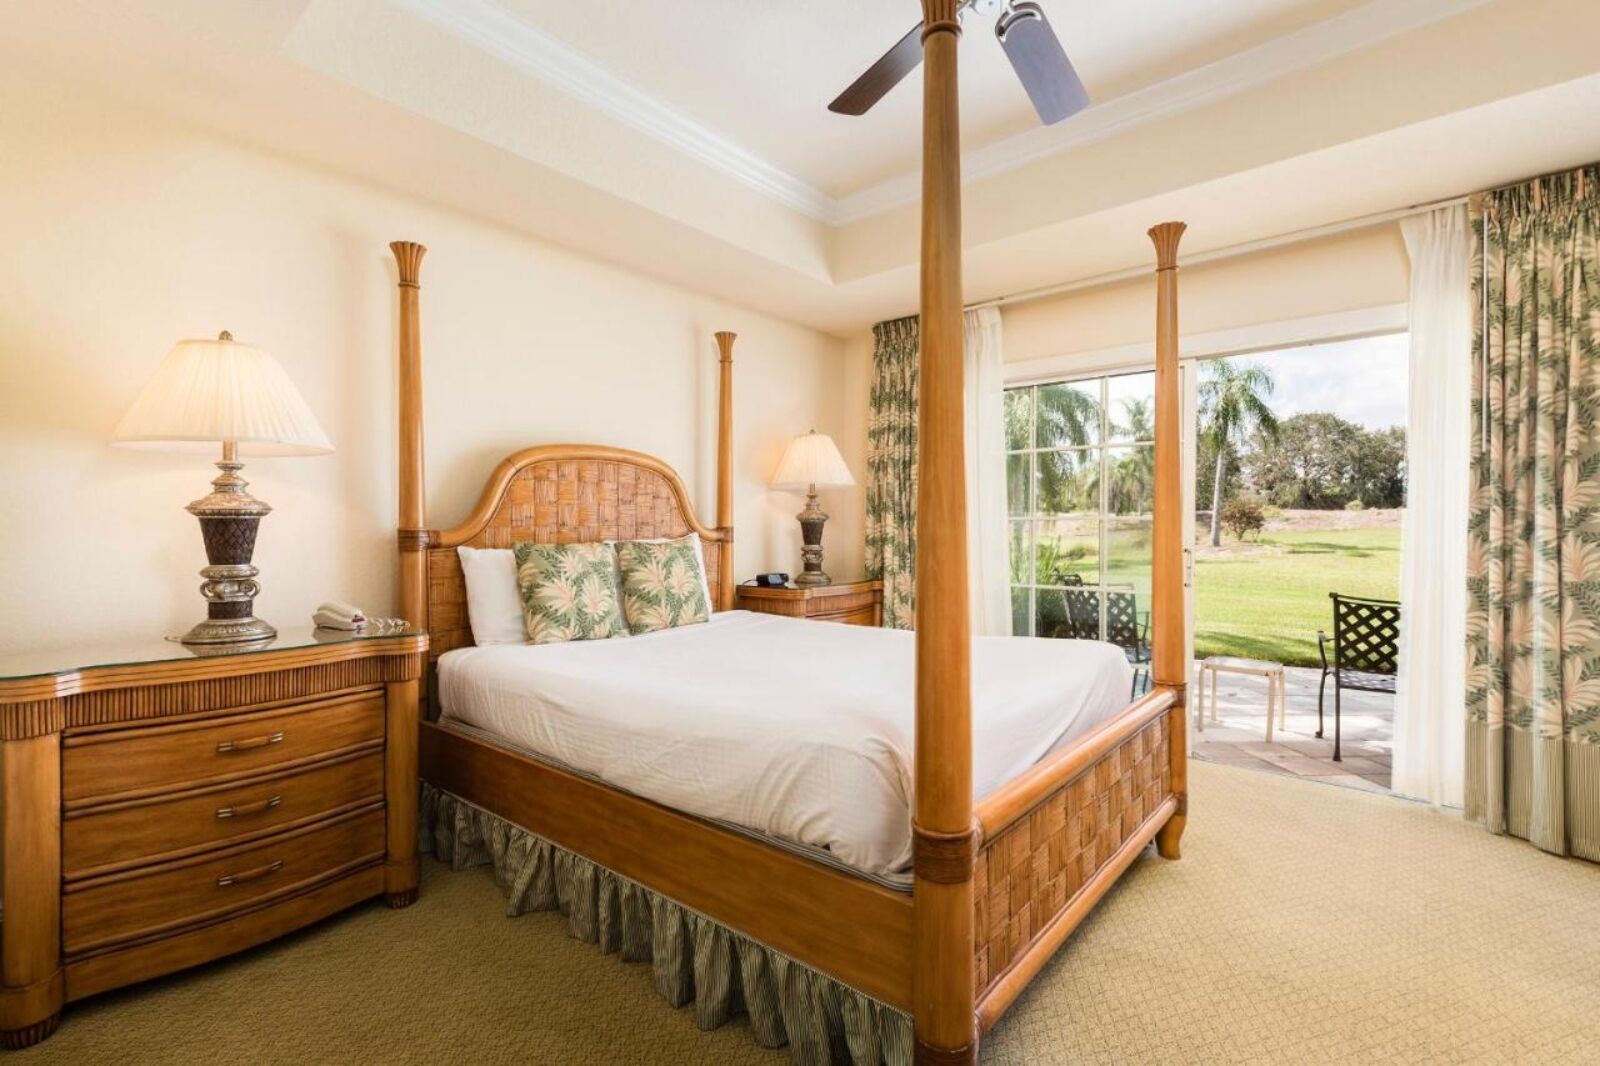 Bedroom at Reunion Resort & Golf Club one of the best Orlando resorts